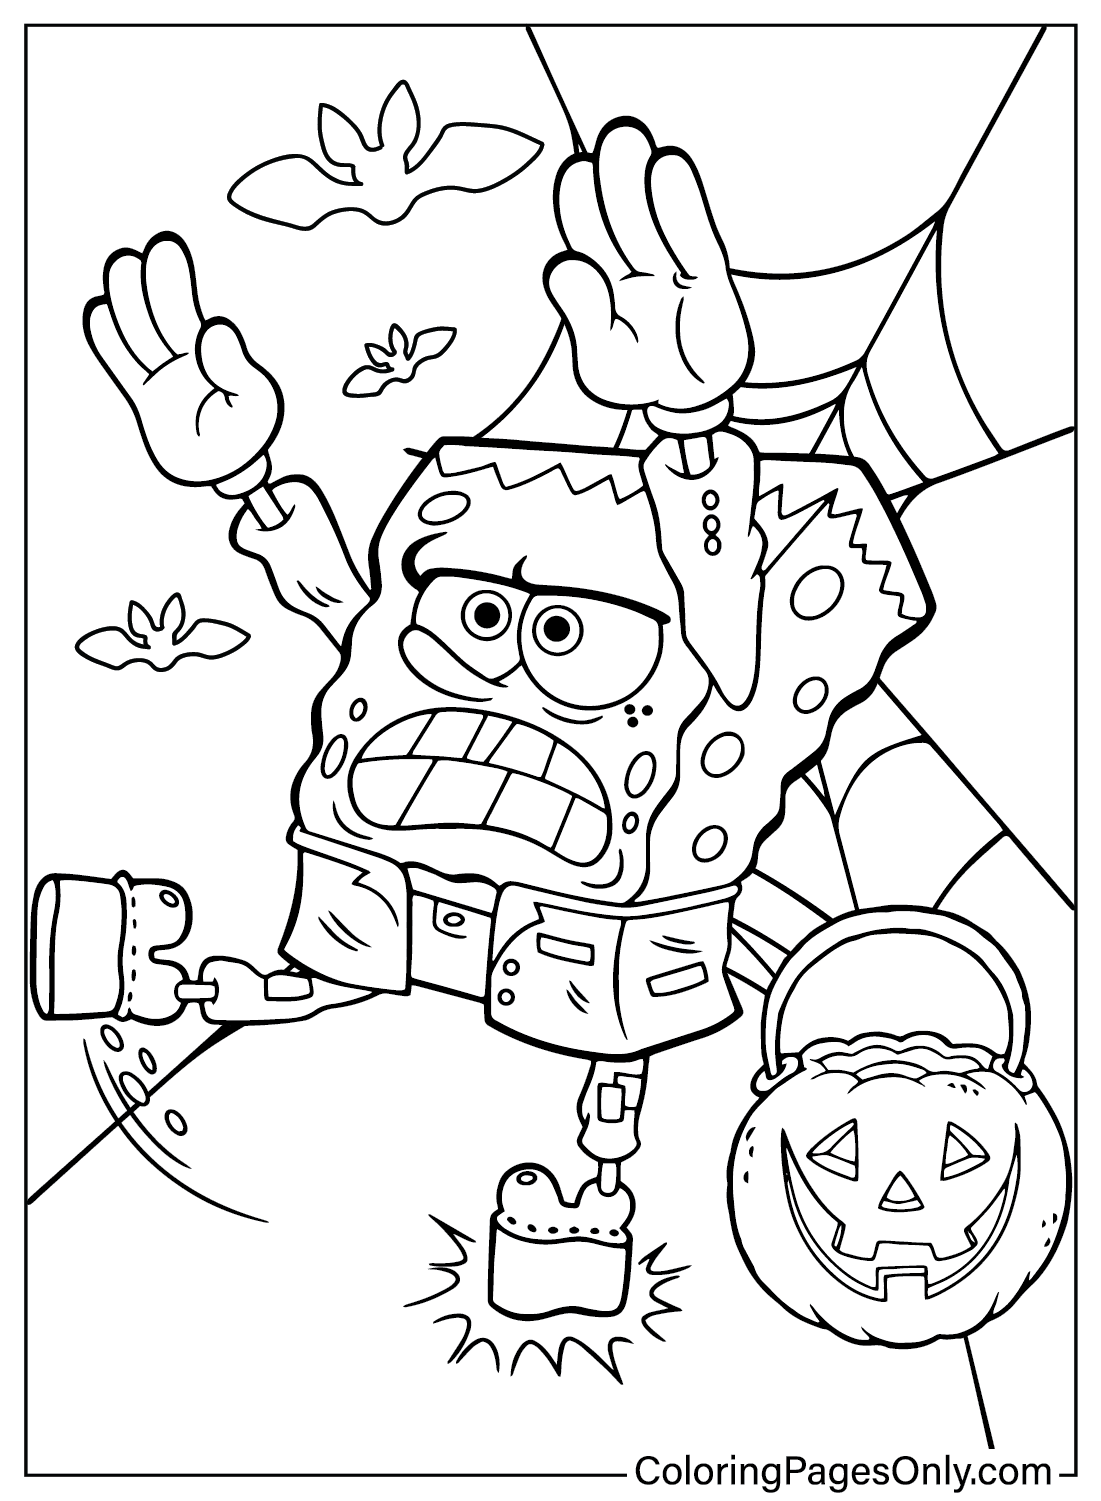 Spongebob Halloween Coloring Pages - Free Printable Coloring Pages